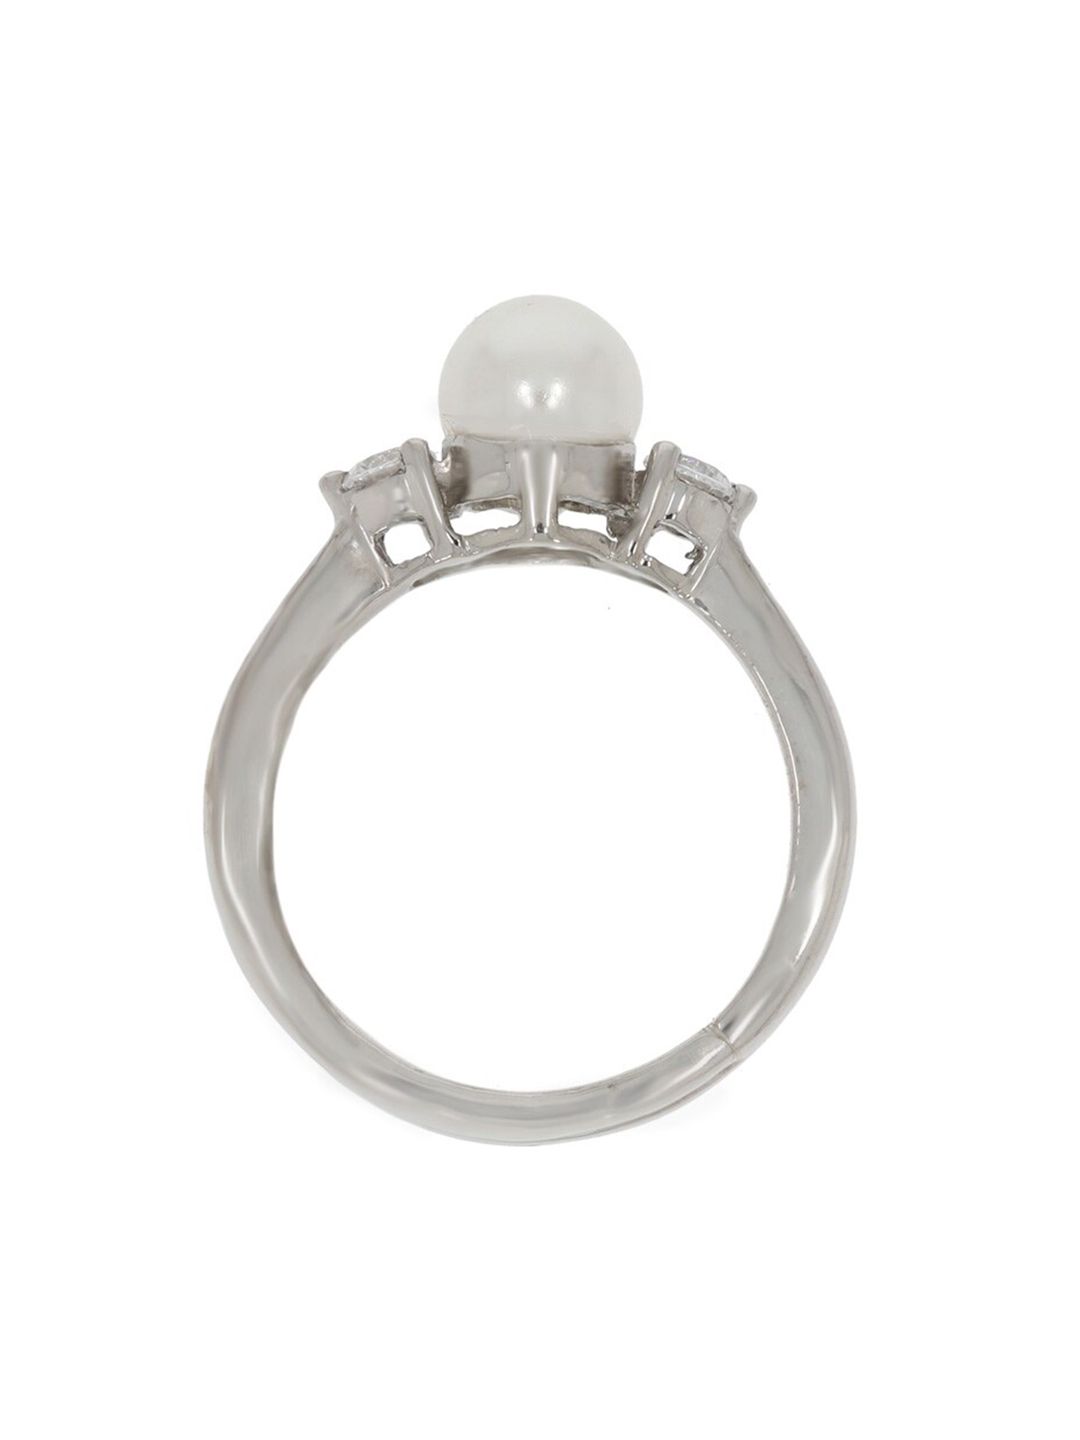 ANAYRA 925 Sterling Silver Silver-Toned White Stone-Studded Beaded Finger Ring Price in India